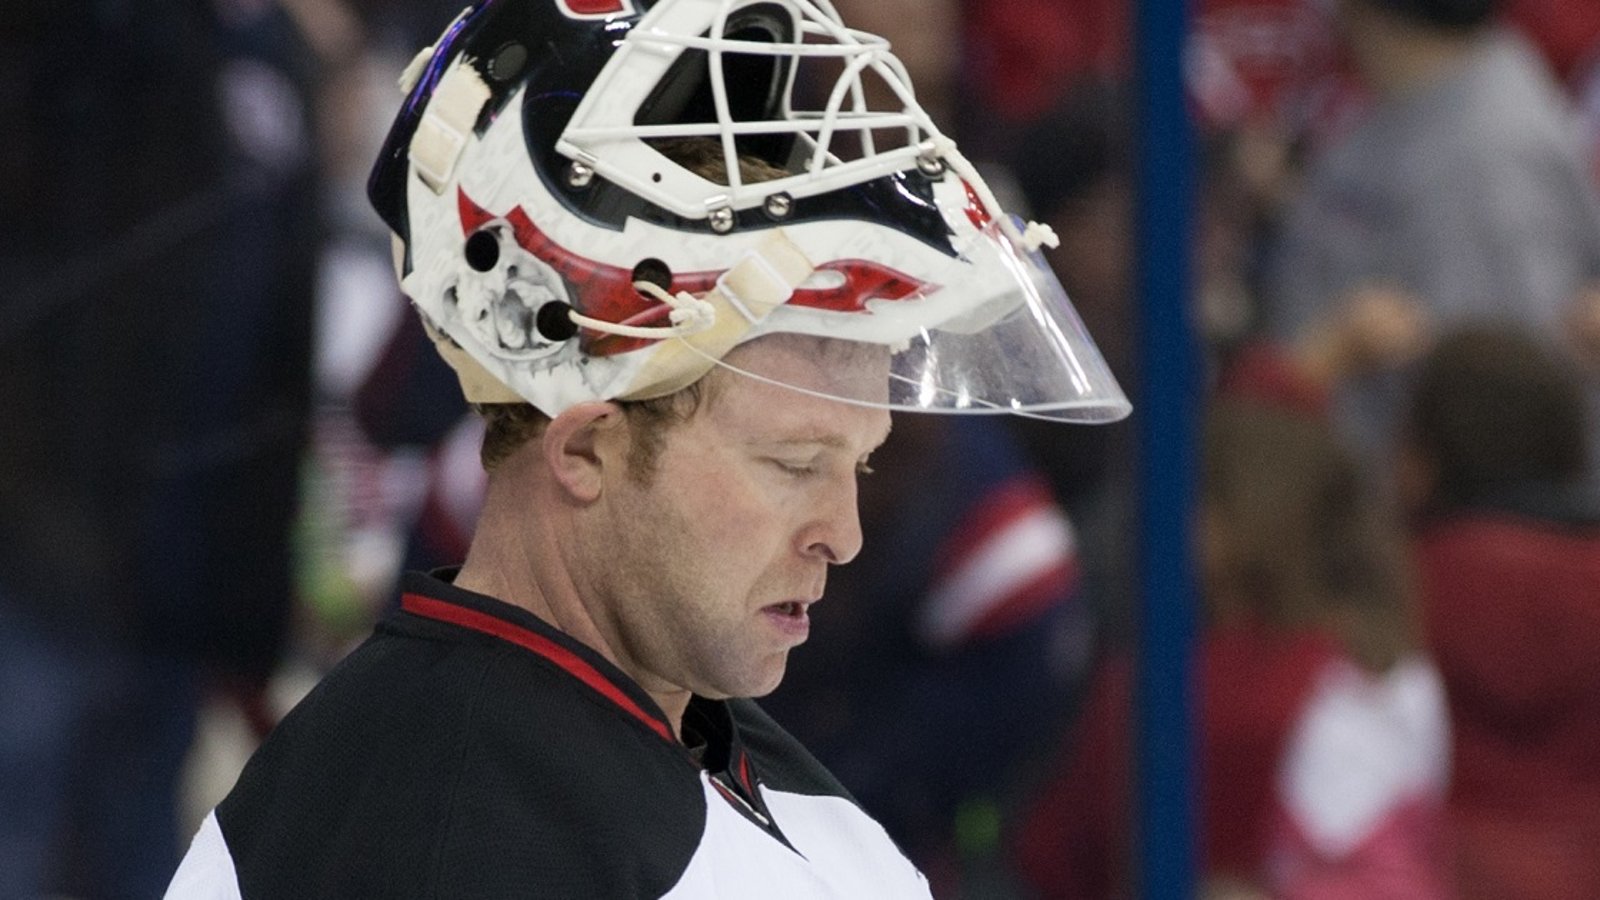 Martin Brodeur discusses the possibility of becoming the next Devils GM.